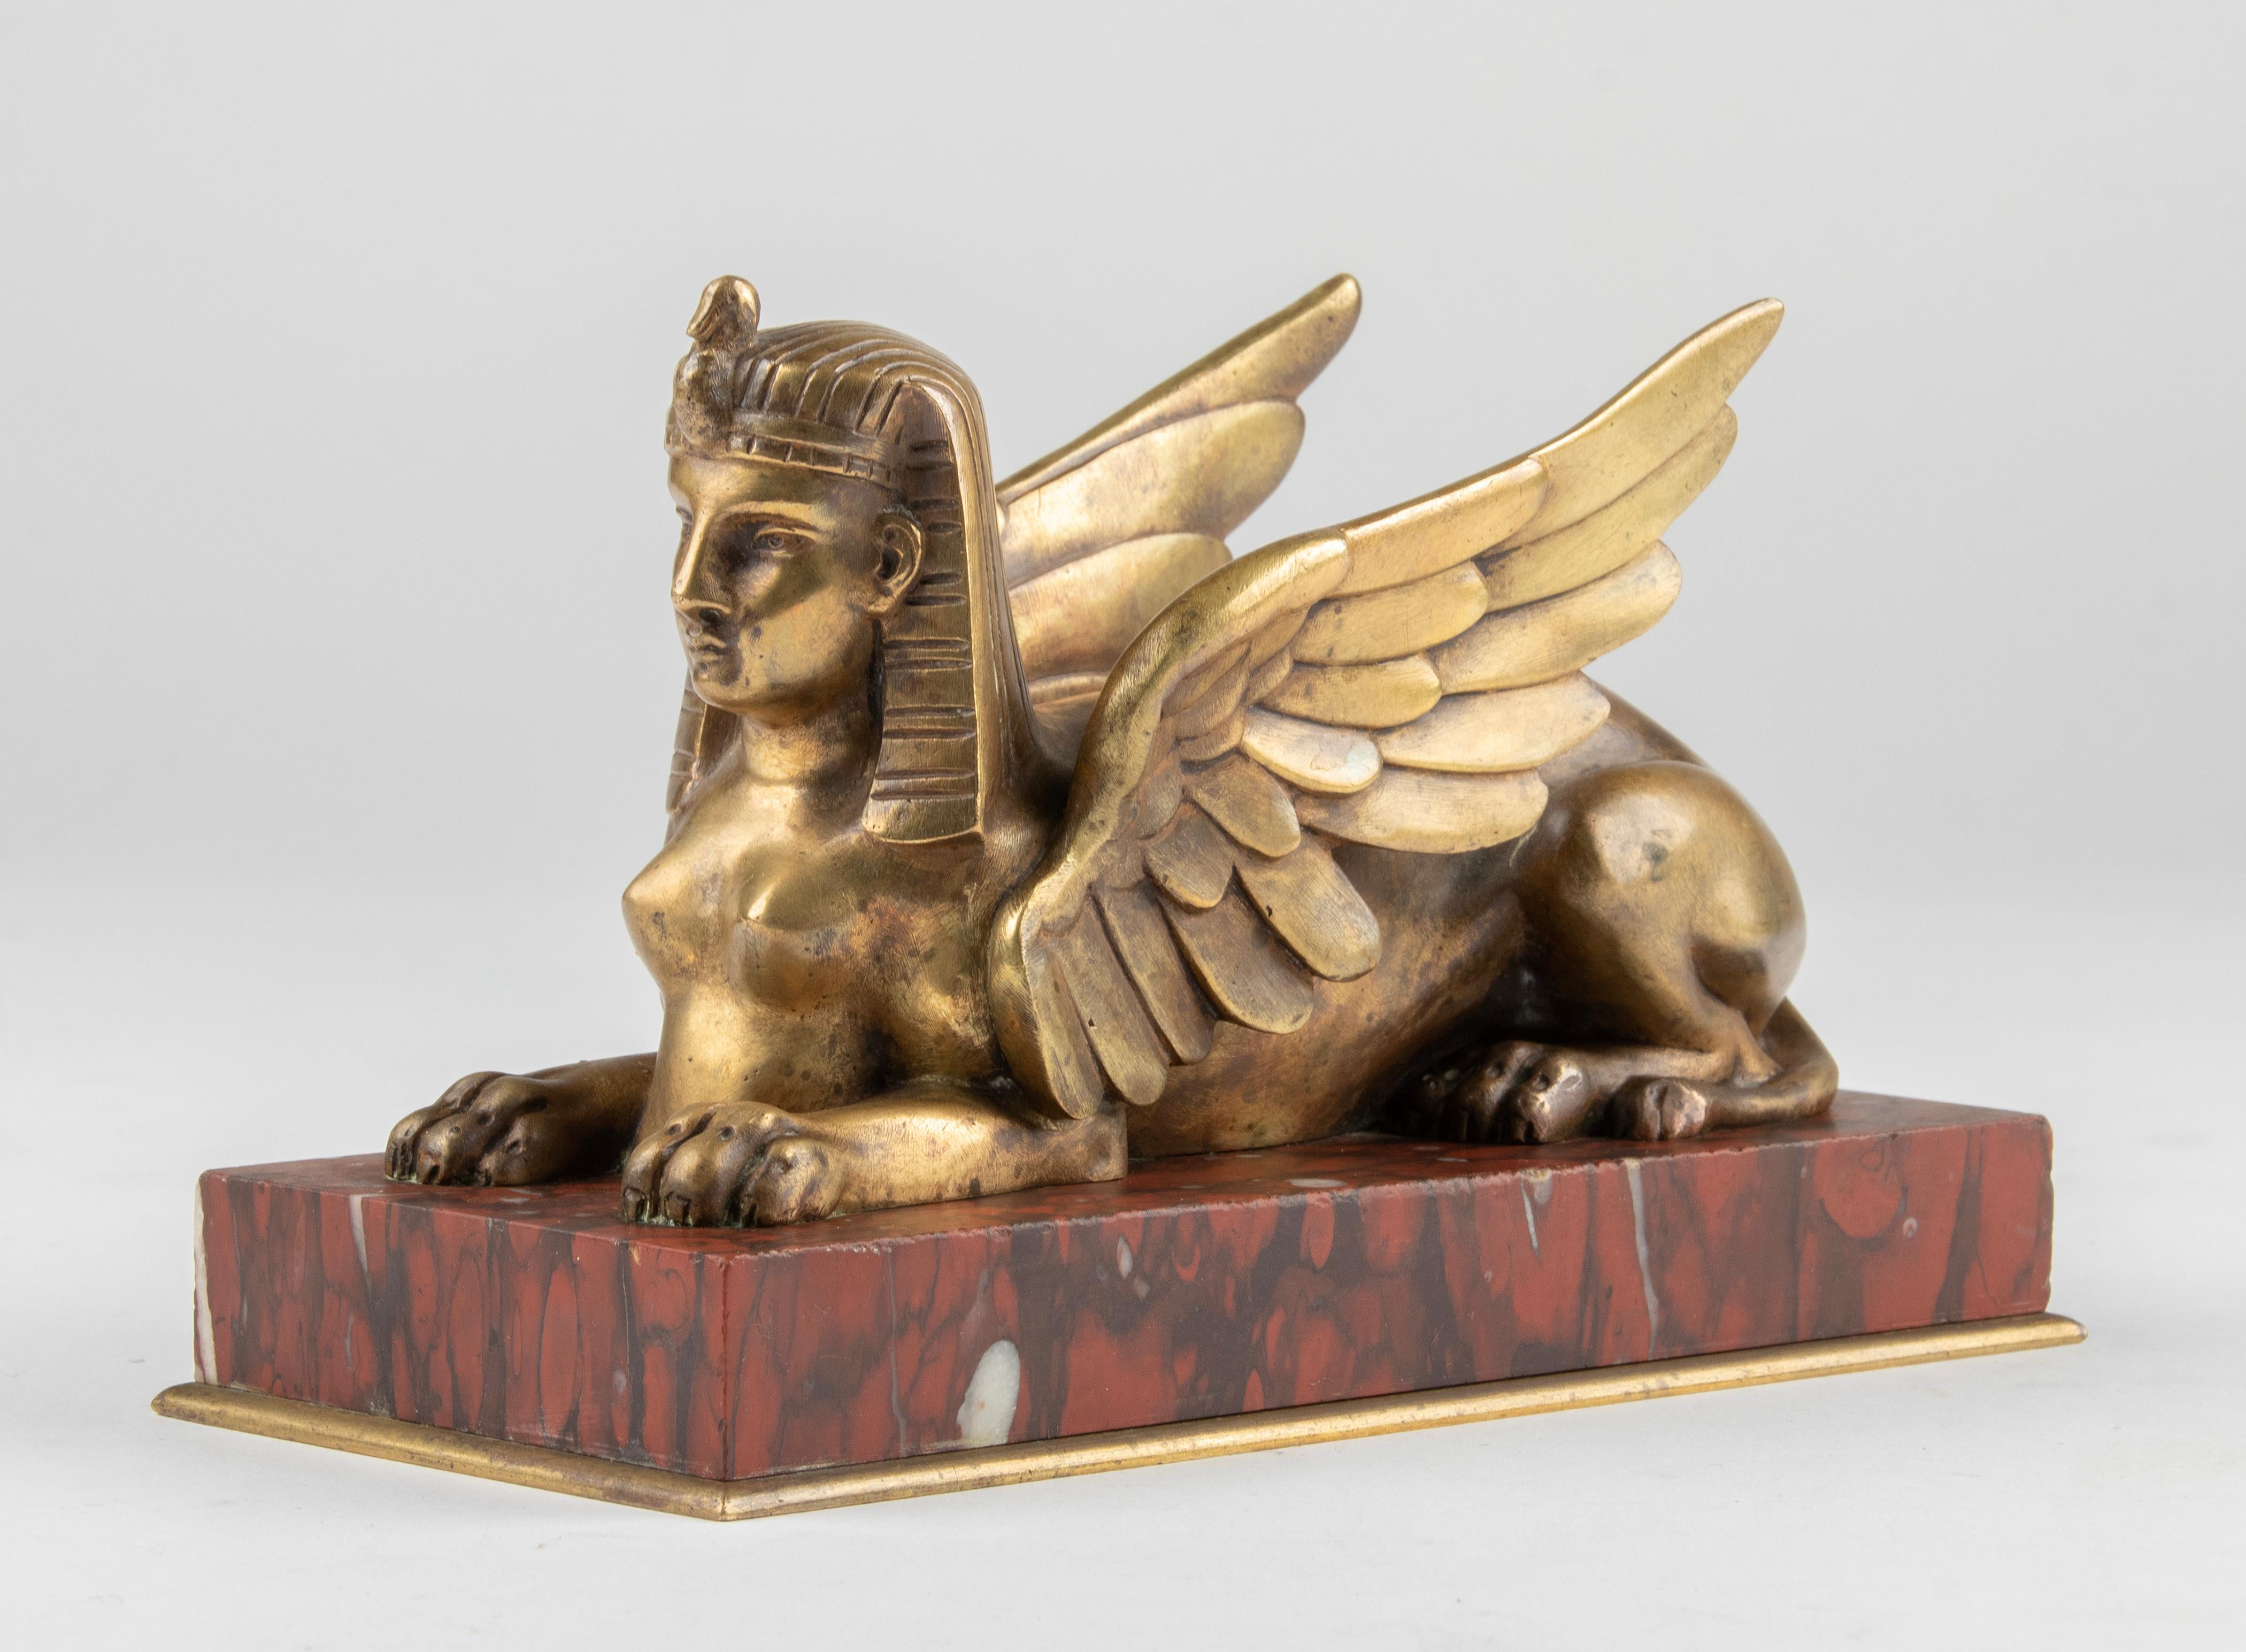 An antique small bronze sculpture of a winged Sphinx, on a red 